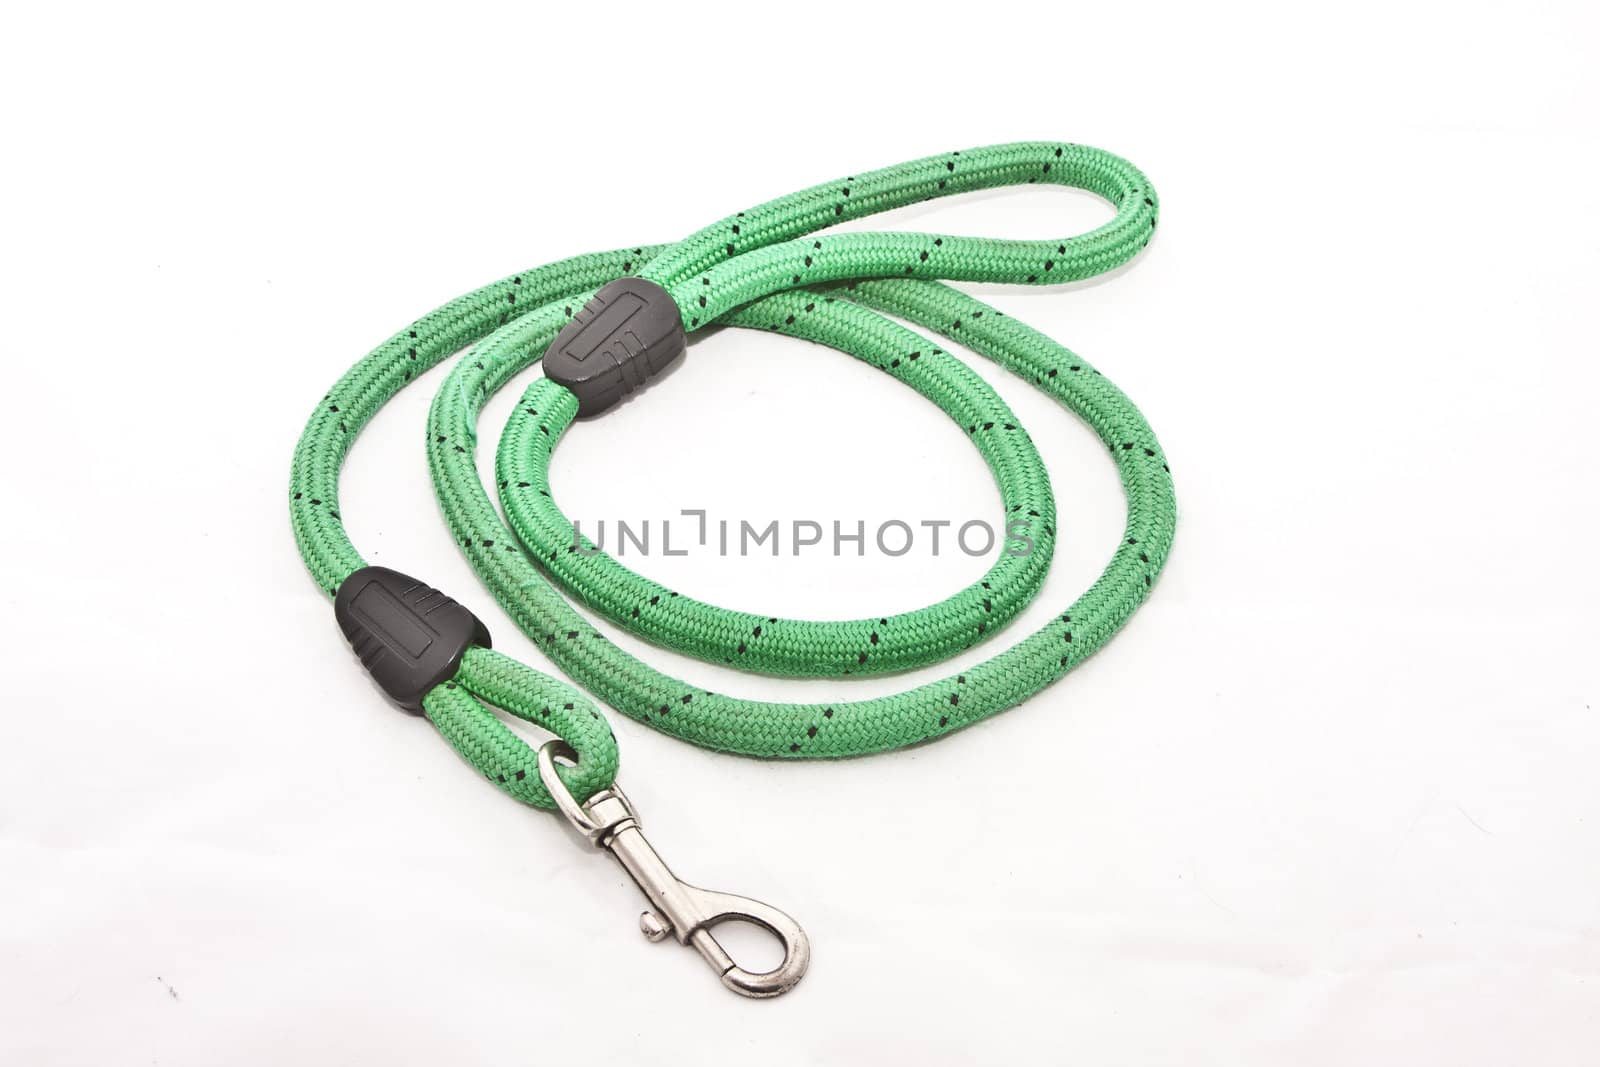 A braided dog lead over a white background